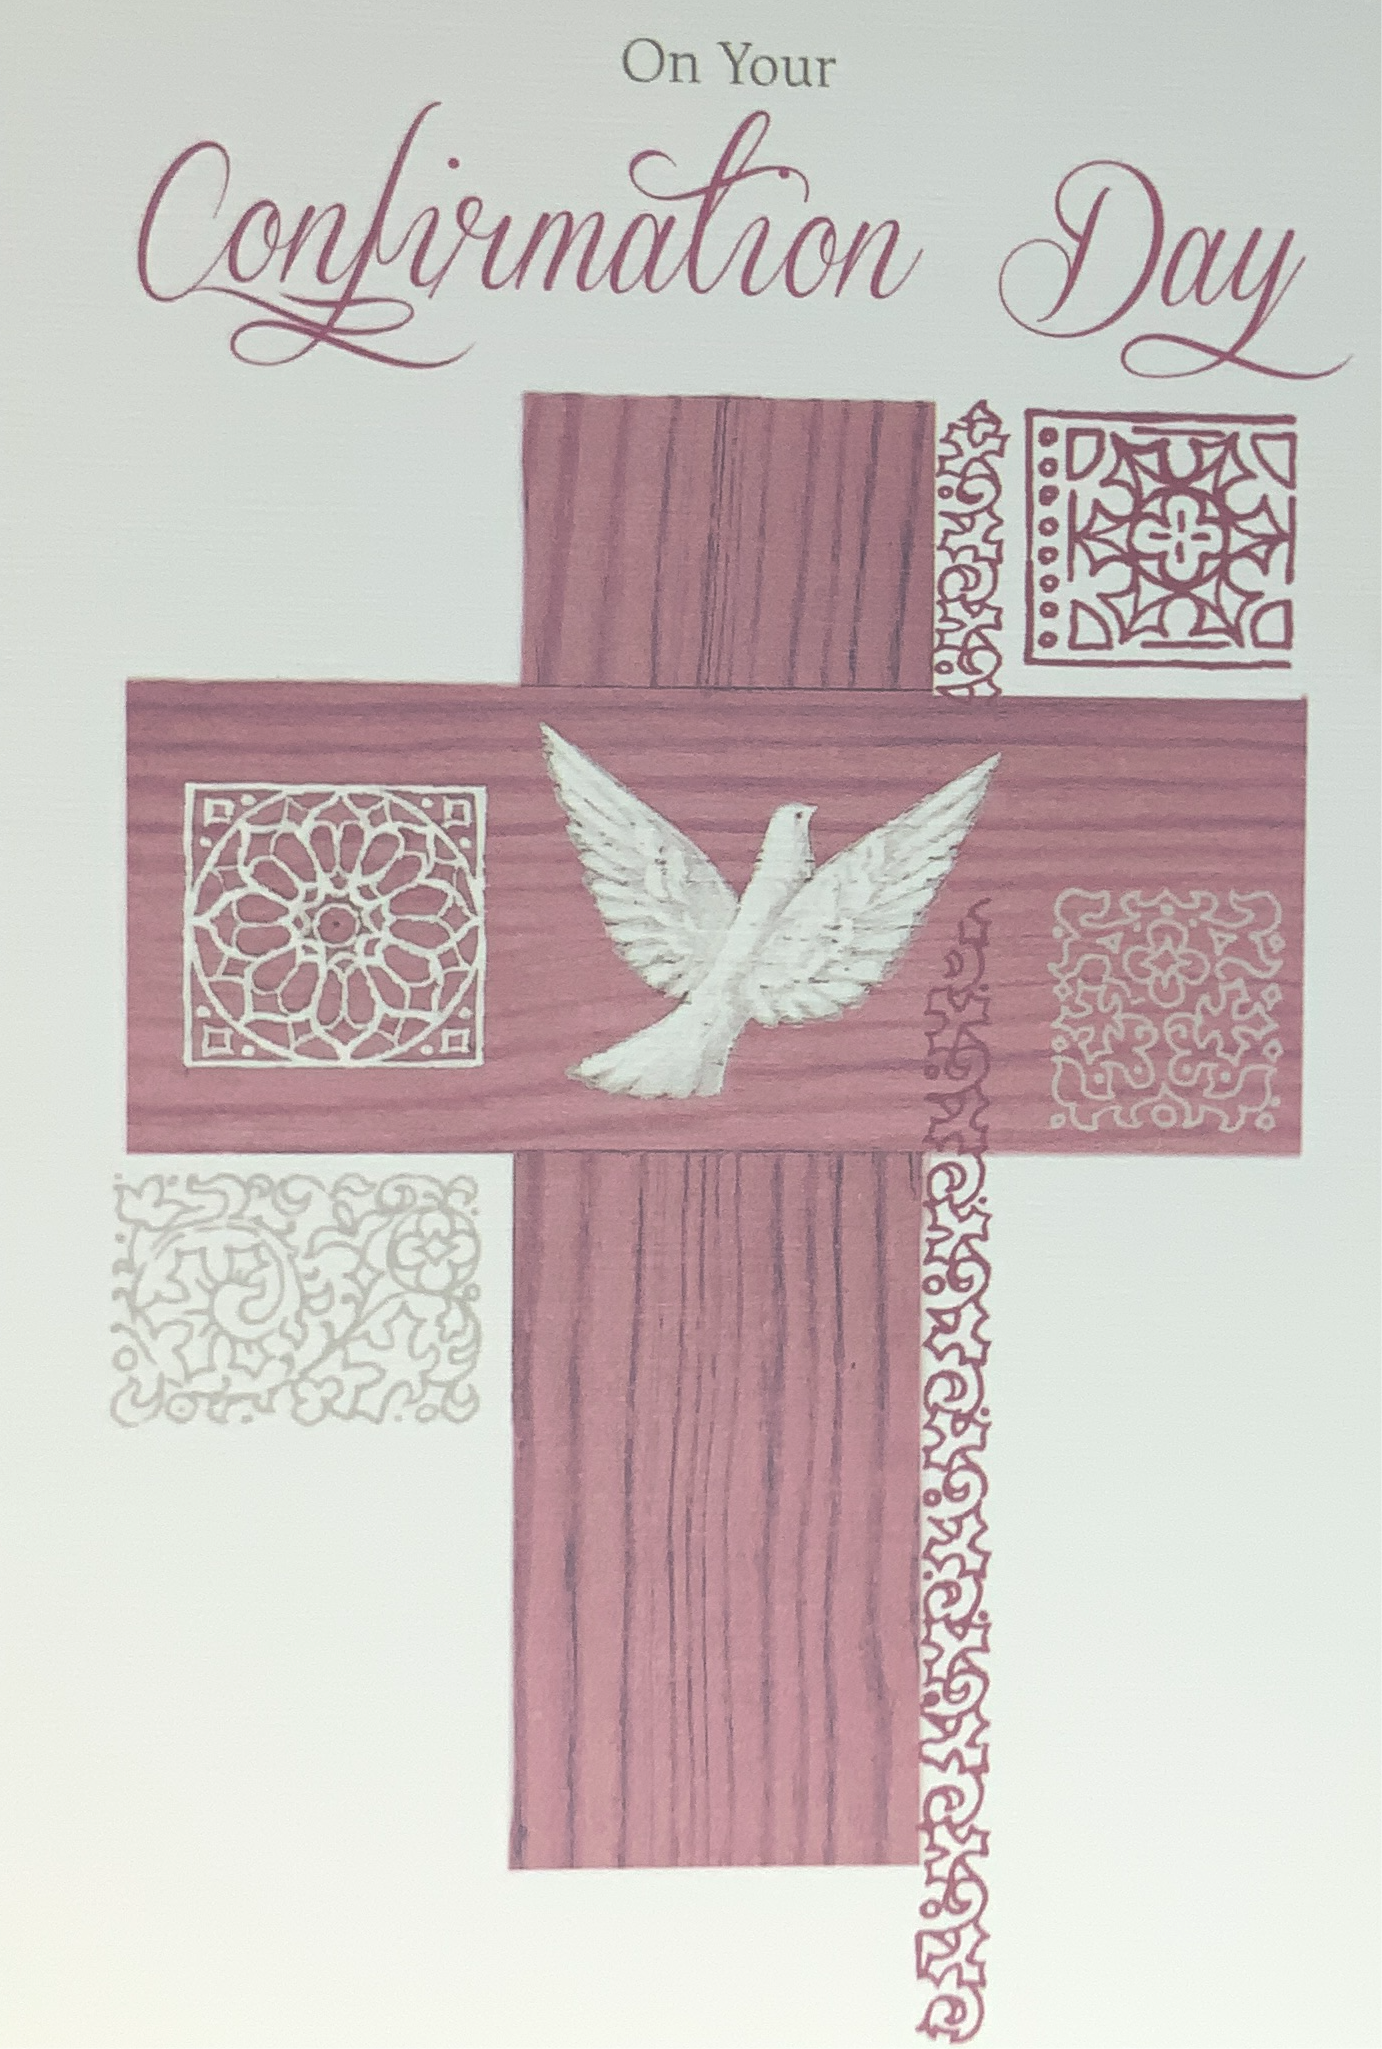 Confirmation Card - Cross With Celtic Ornaments (Girl)